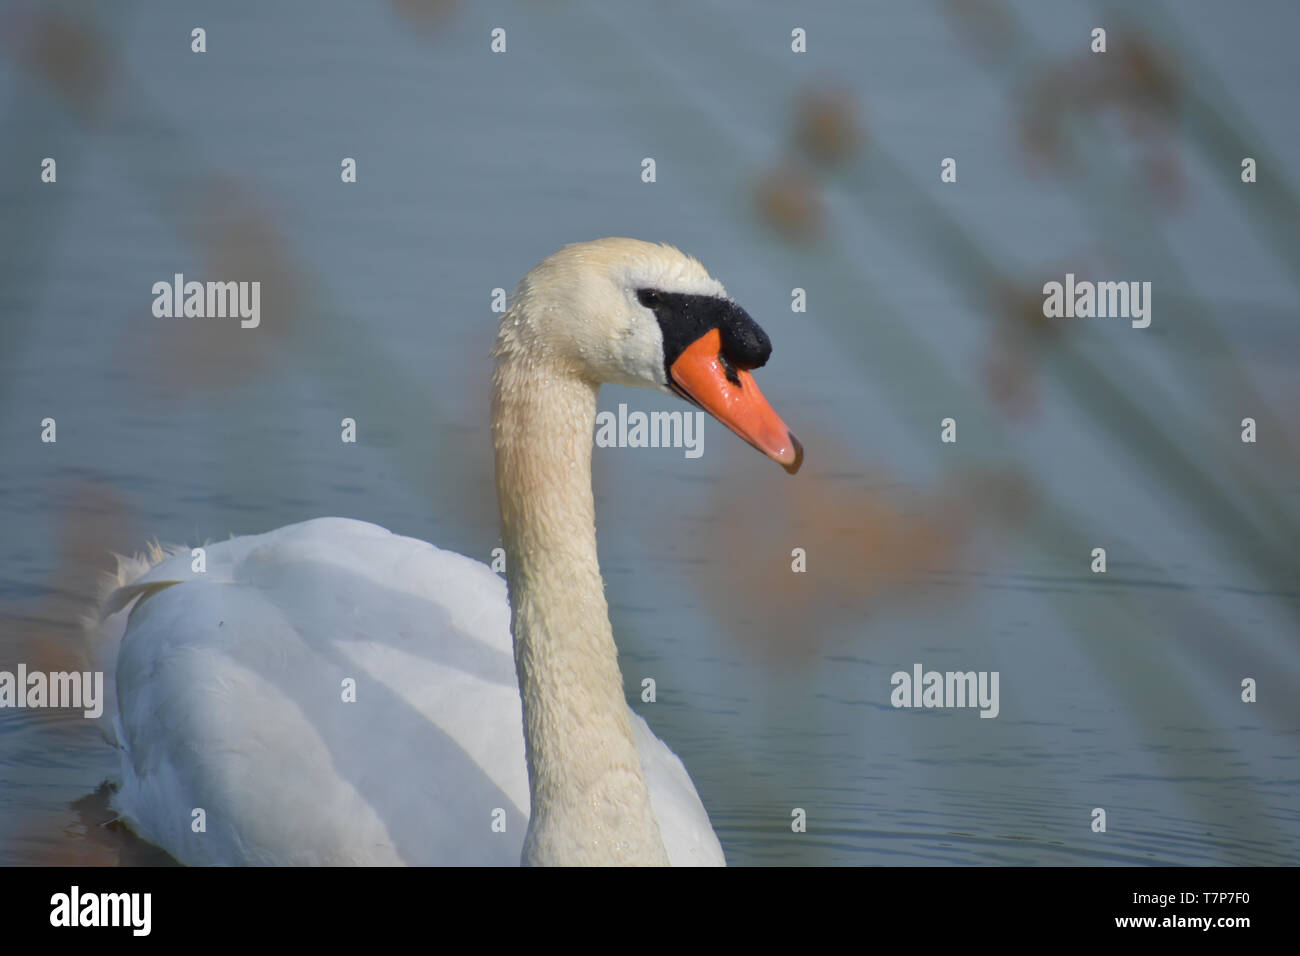 An elegant mute swan swimming on a pond, viewed through a blur of bulrushes. Stock Photo